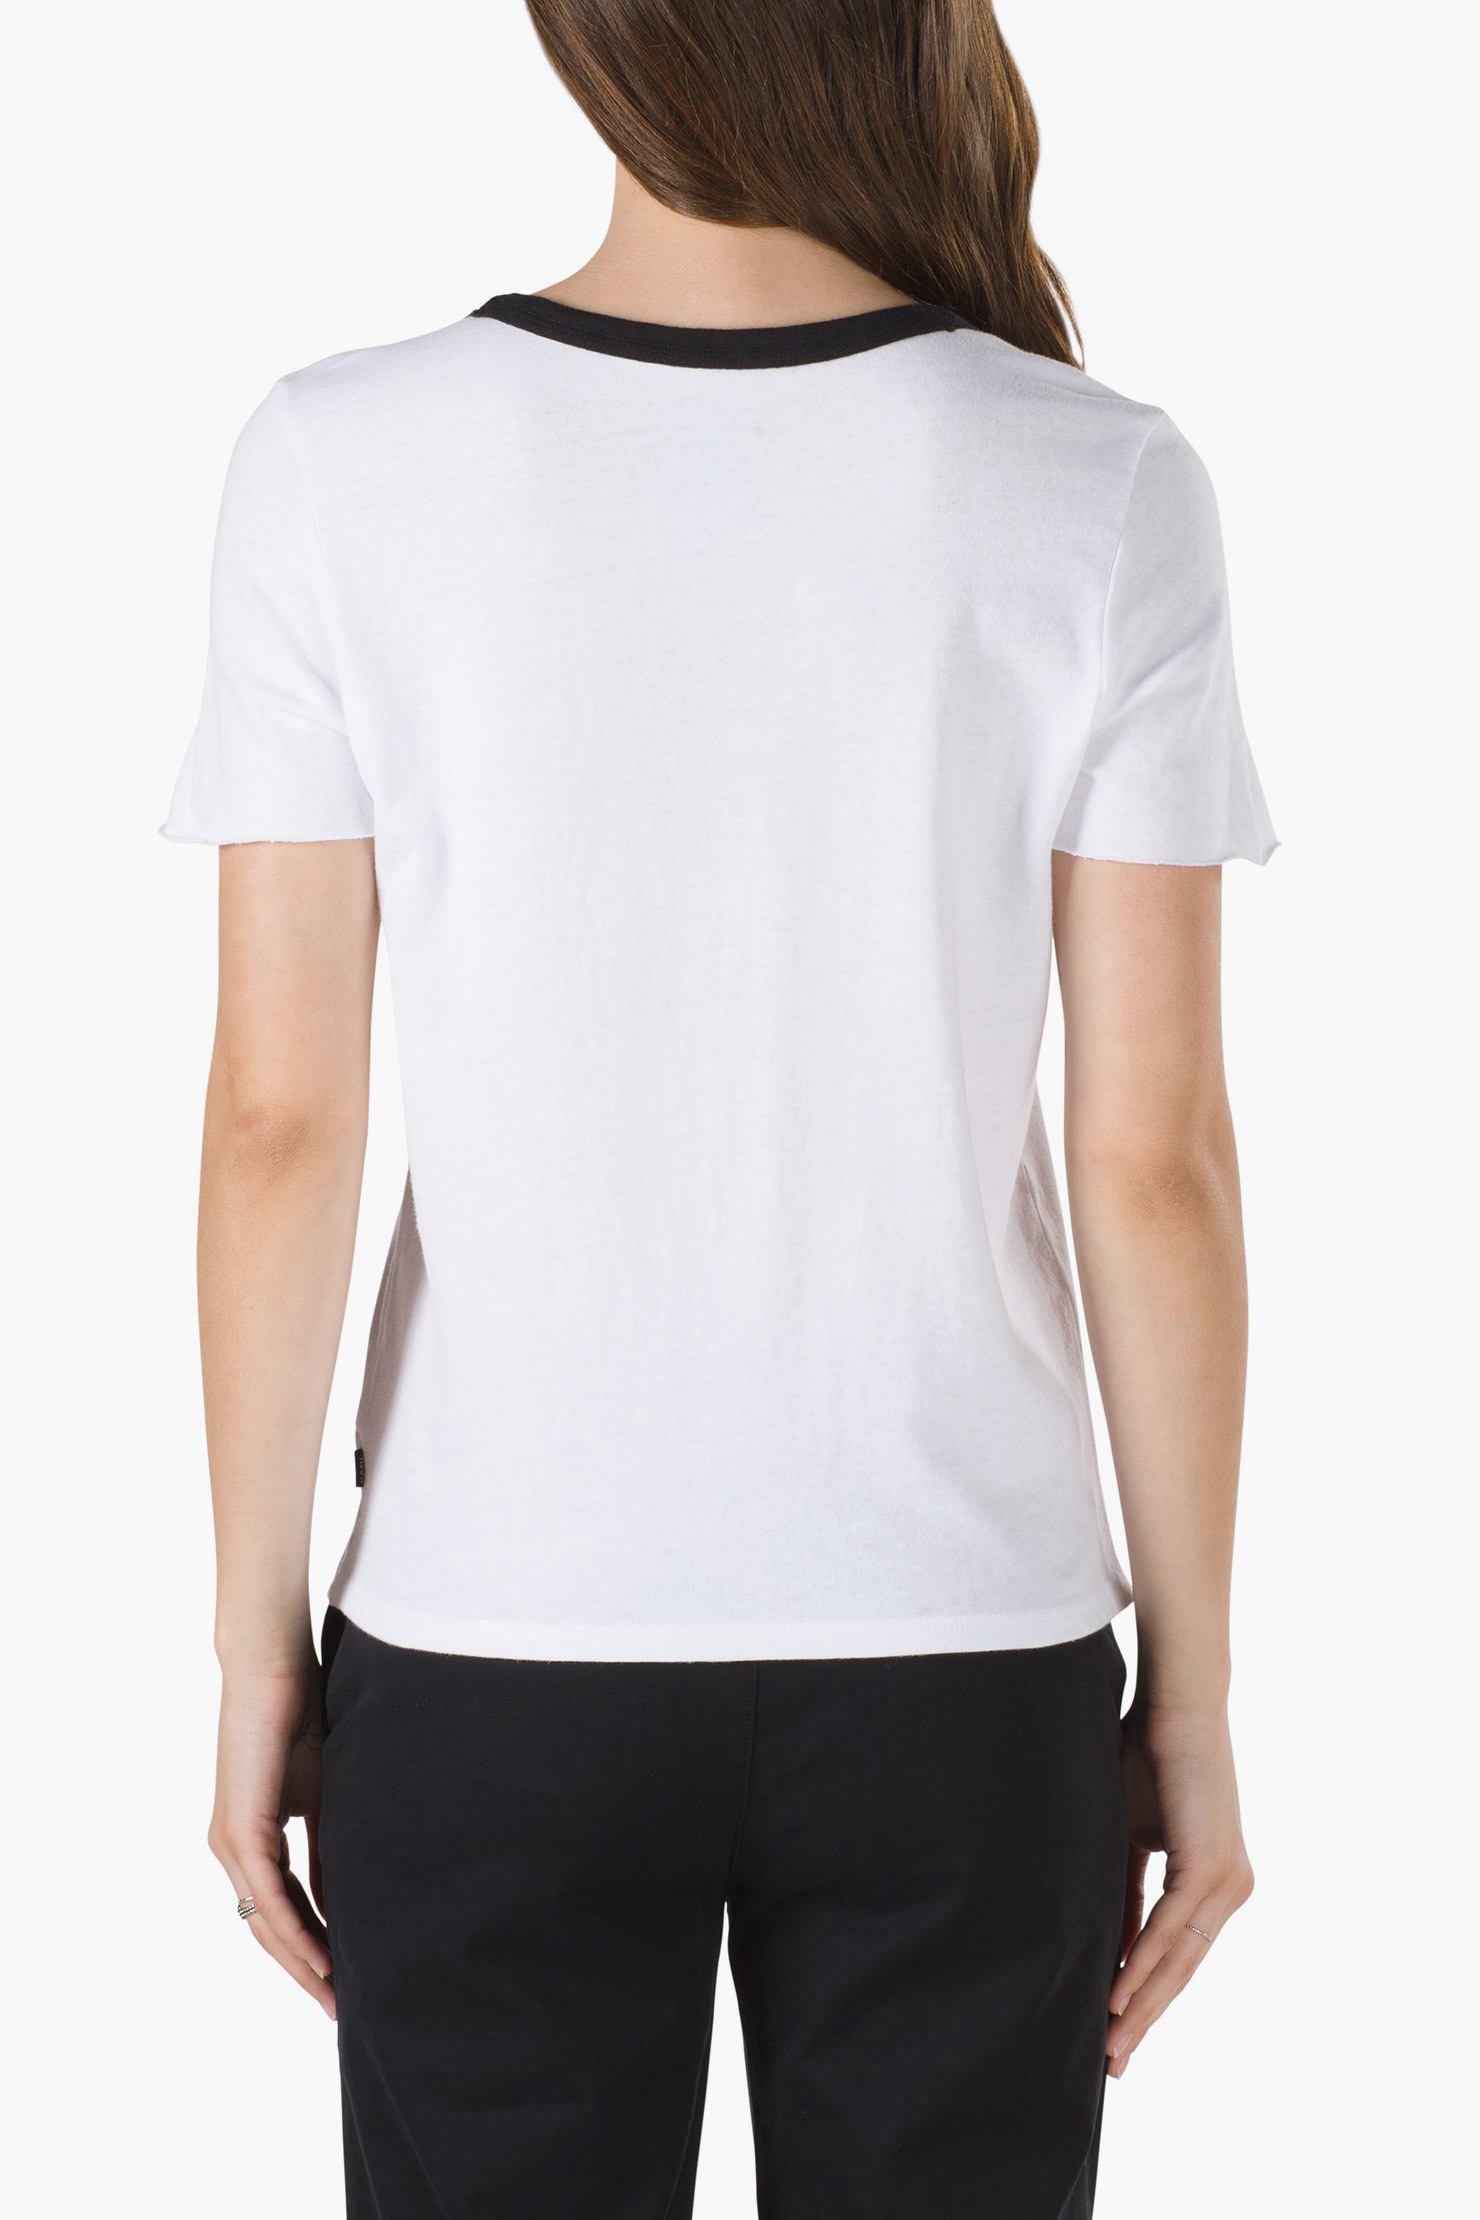 Lyst - Vans T-shirts & Polo Shirts in White